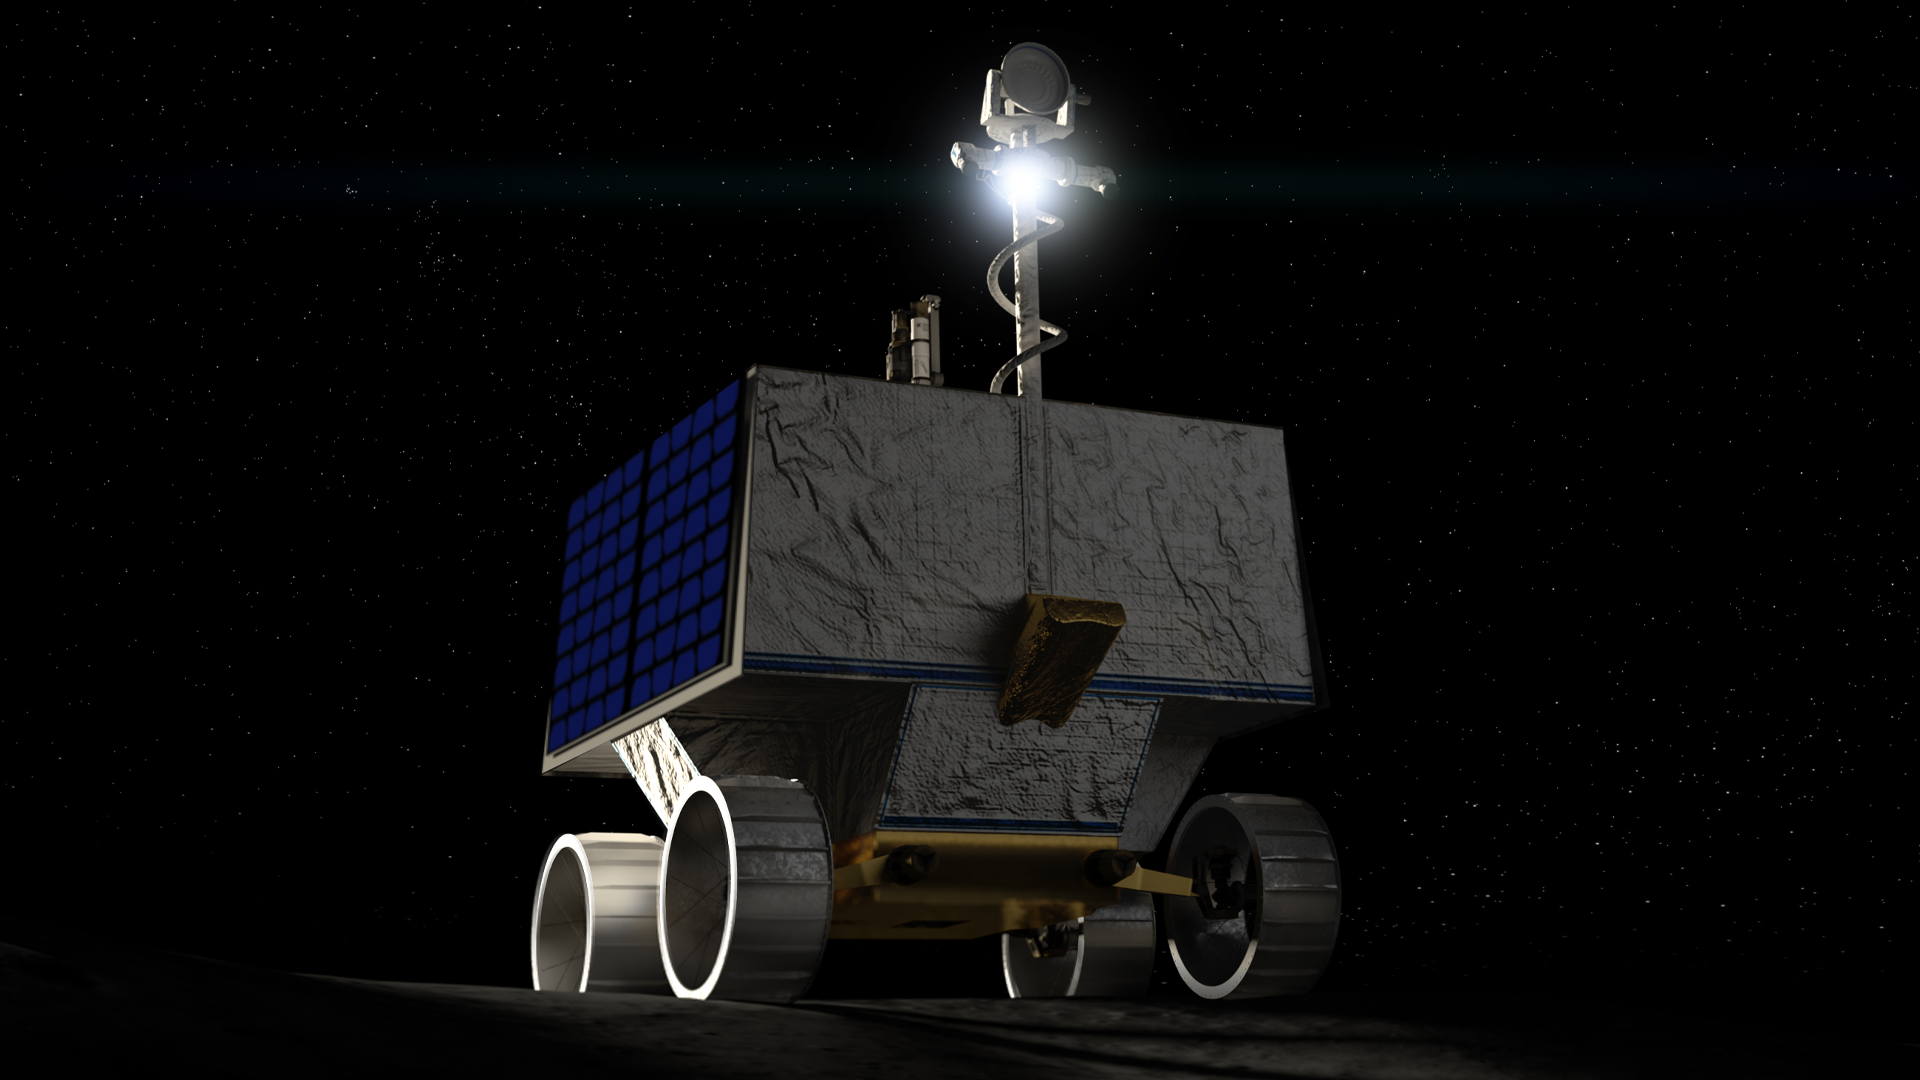 NASA’s First Lunar Rover Will Aid Astronauts Live to declare the tale the Moon